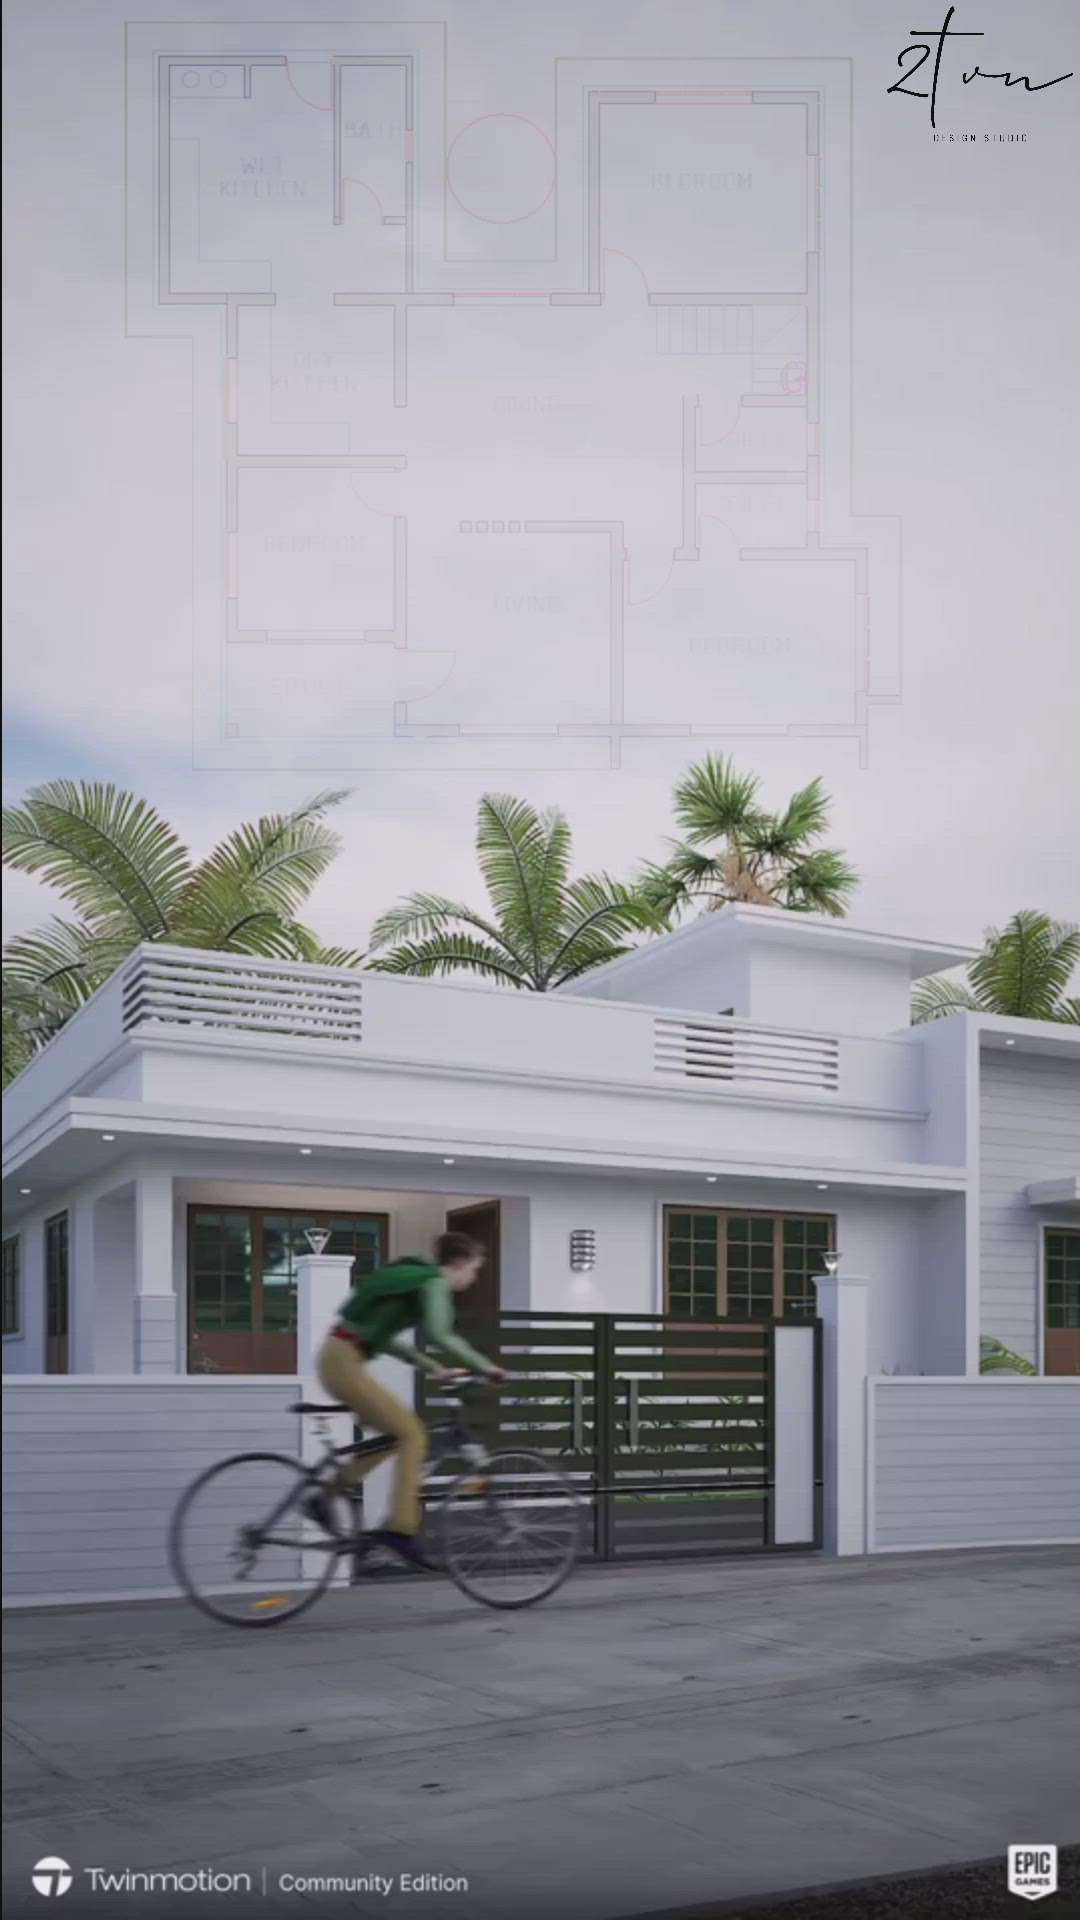 Hi everyone!
Dive into our awesome archviz walkthrough project capturing a Compact Residential 1460 SQFT 3 BHK home 🏠 in Kerala. Enjoy the journey!

Residence 1460 SQFT

3BHK

 







#keralahomes #compacthome #walkthrough #3D #architect #budgethome #kerala #interiordesign #visualization #residence # architecture #indianhome #2bhk #homes #architecturedesign #renderlovers  #3dsmax #3drendering #3dart #3dartist #3dmodeling #architecturevisualization #twinmotion #homesweethome #keralahome #keralahousestyle